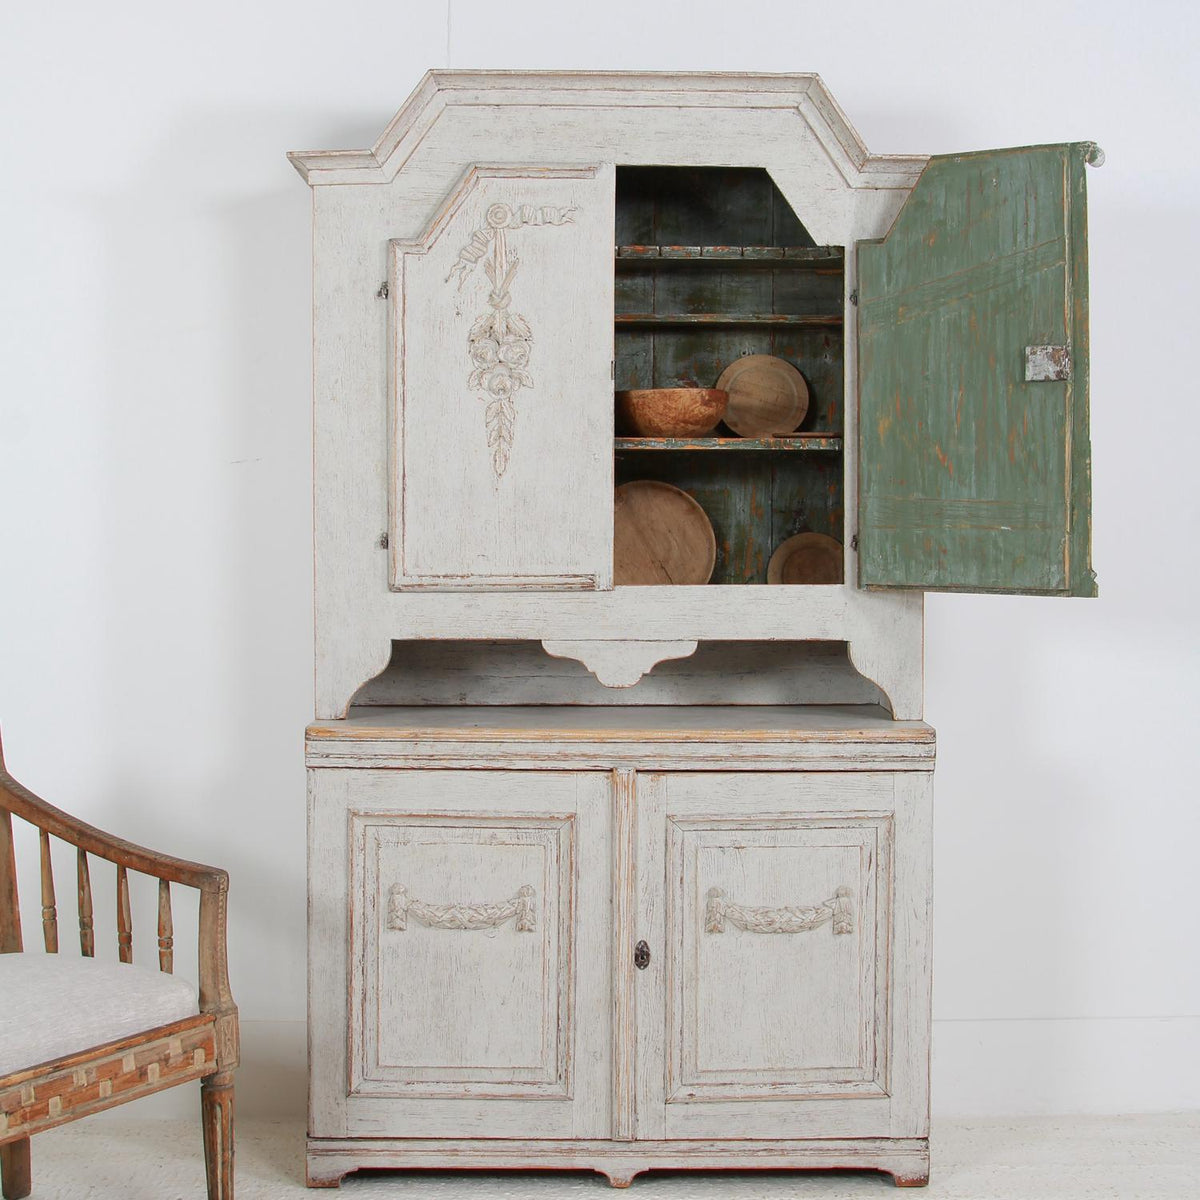 Exquisite Period Rococo Swedish  19thC Cabinet from Jamtland